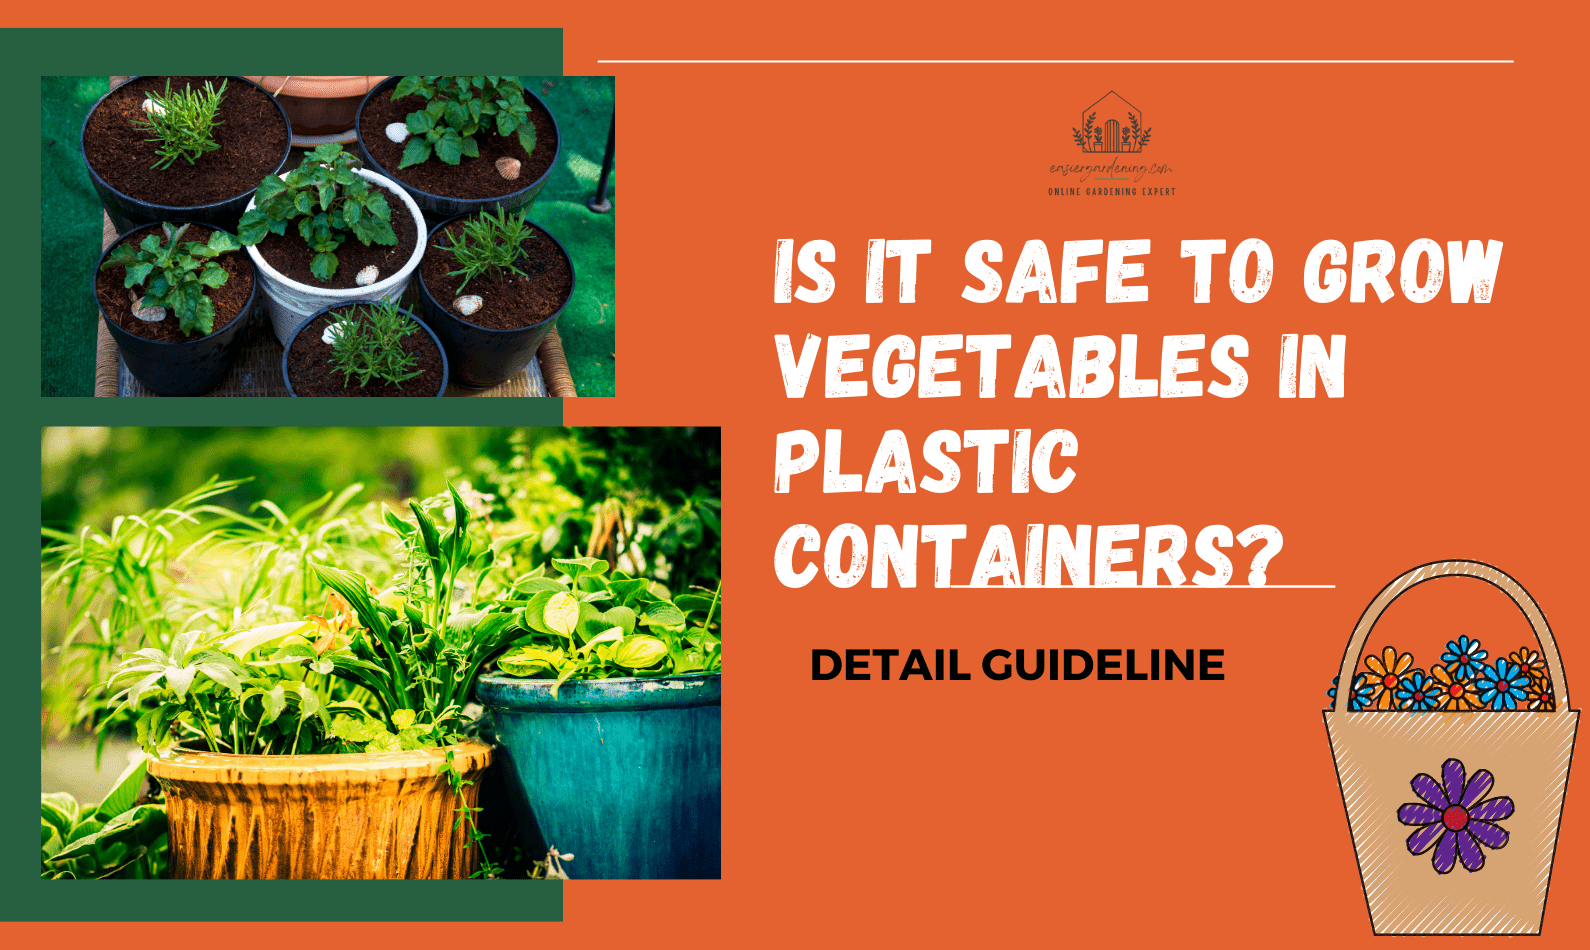 Is It Safe to Grow Vegetables in Plastic Containers?